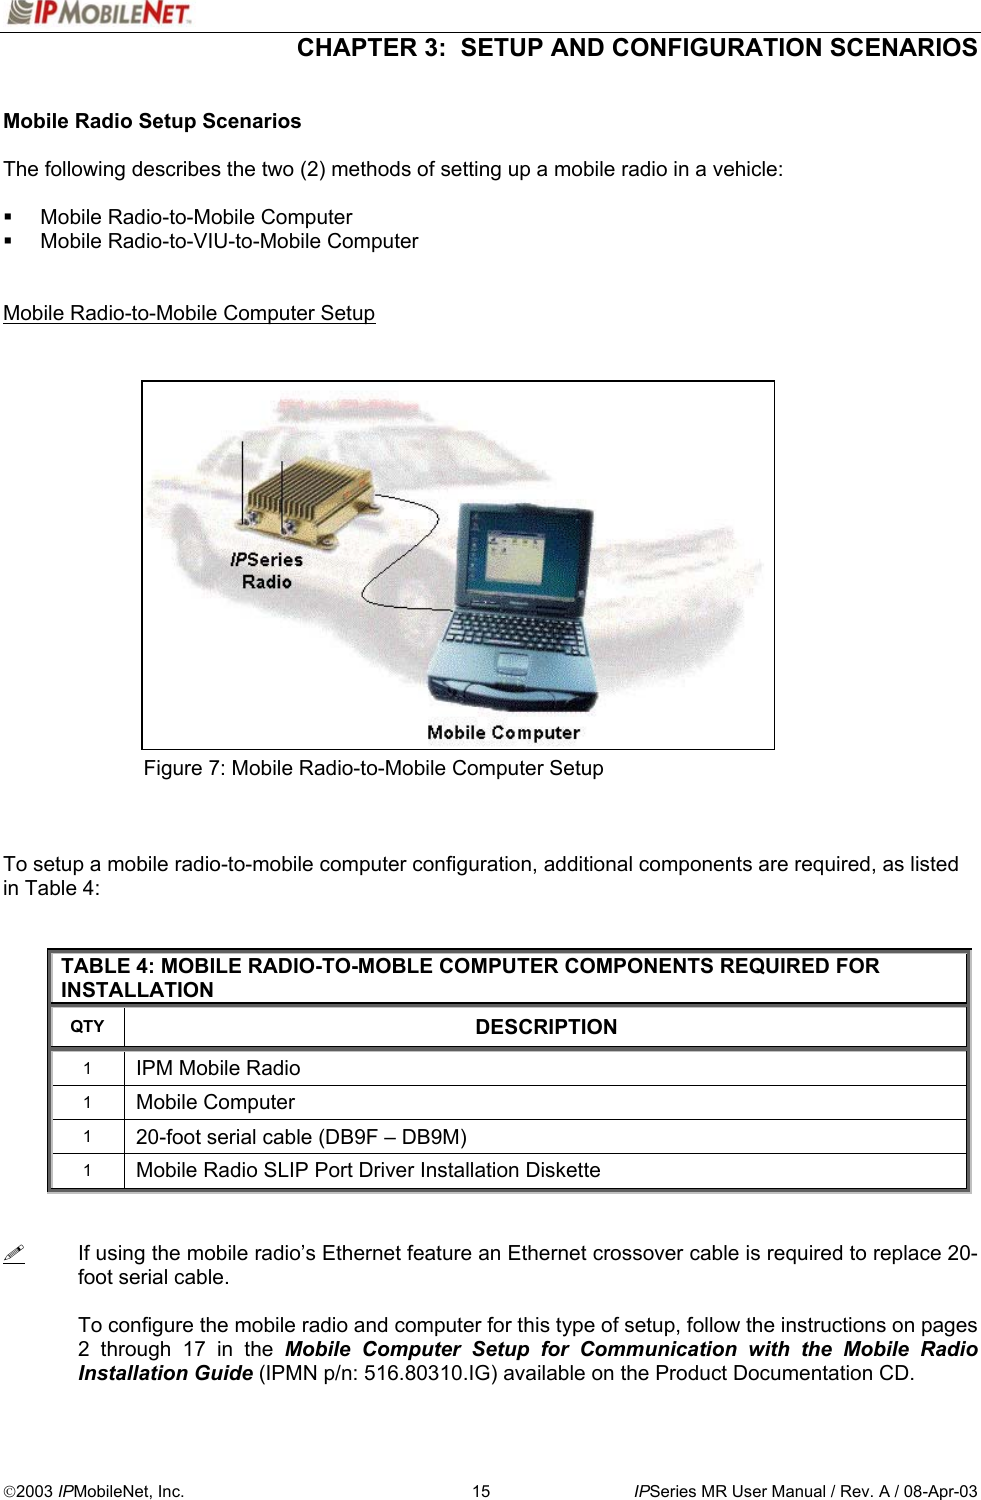  CHAPTER 3:  SETUP AND CONFIGURATION SCENARIOS  2003 IPMobileNet, Inc.  15  IPSeries MR User Manual / Rev. A / 08-Apr-03  Mobile Radio Setup Scenarios  The following describes the two (2) methods of setting up a mobile radio in a vehicle:    Mobile Radio-to-Mobile Computer   Mobile Radio-to-VIU-to-Mobile Computer   Mobile Radio-to-Mobile Computer Setup                   Figure 7: Mobile Radio-to-Mobile Computer Setup    To setup a mobile radio-to-mobile computer configuration, additional components are required, as listed in Table 4:   TABLE 4: MOBILE RADIO-TO-MOBLE COMPUTER COMPONENTS REQUIRED FOR INSTALLATION QTY  DESCRIPTION 1  IPM Mobile Radio 1  Mobile Computer 1  20-foot serial cable (DB9F – DB9M) 1  Mobile Radio SLIP Port Driver Installation Diskette    If using the mobile radio’s Ethernet feature an Ethernet crossover cable is required to replace 20-foot serial cable.  To configure the mobile radio and computer for this type of setup, follow the instructions on pages 2 through 17 in the Mobile Computer Setup for Communication with the Mobile Radio Installation Guide (IPMN p/n: 516.80310.IG) available on the Product Documentation CD.  